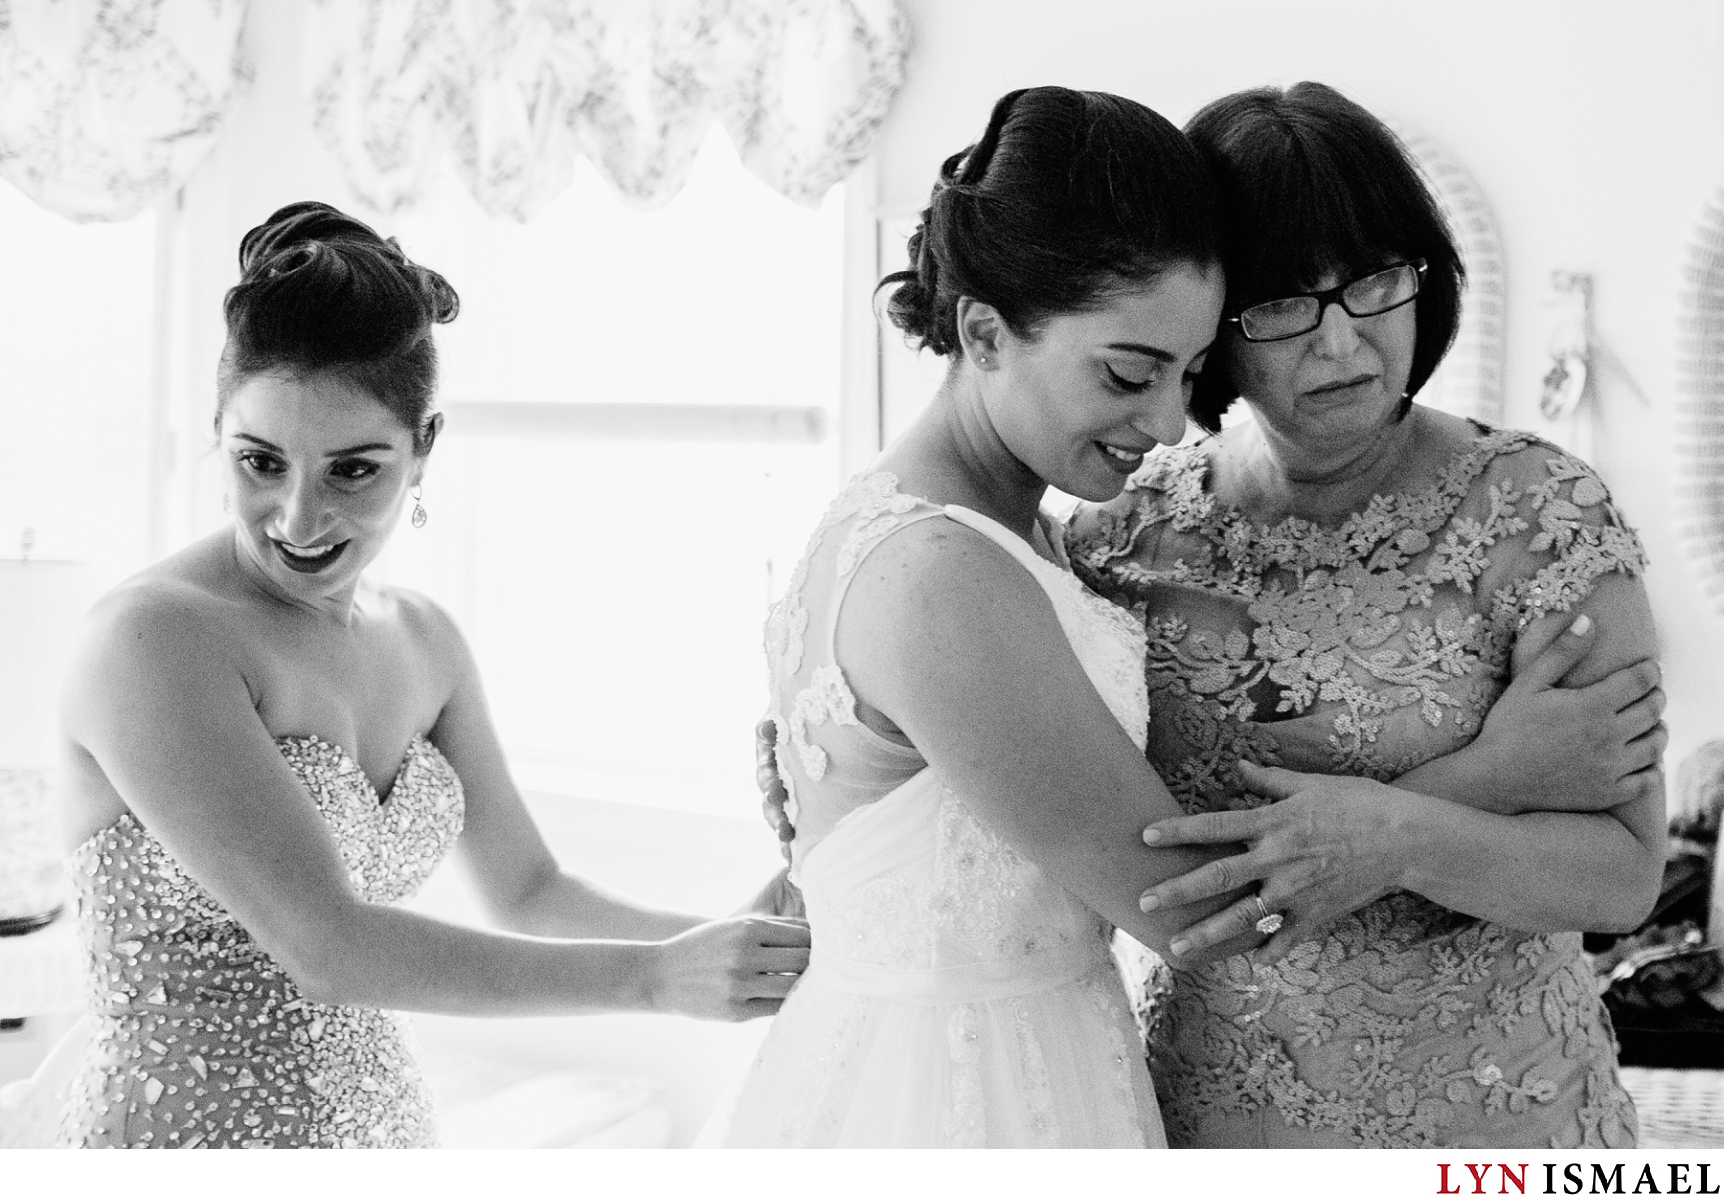 Mother of the bride becomes emotional upon seeing her daughter dressed in her wedding gown